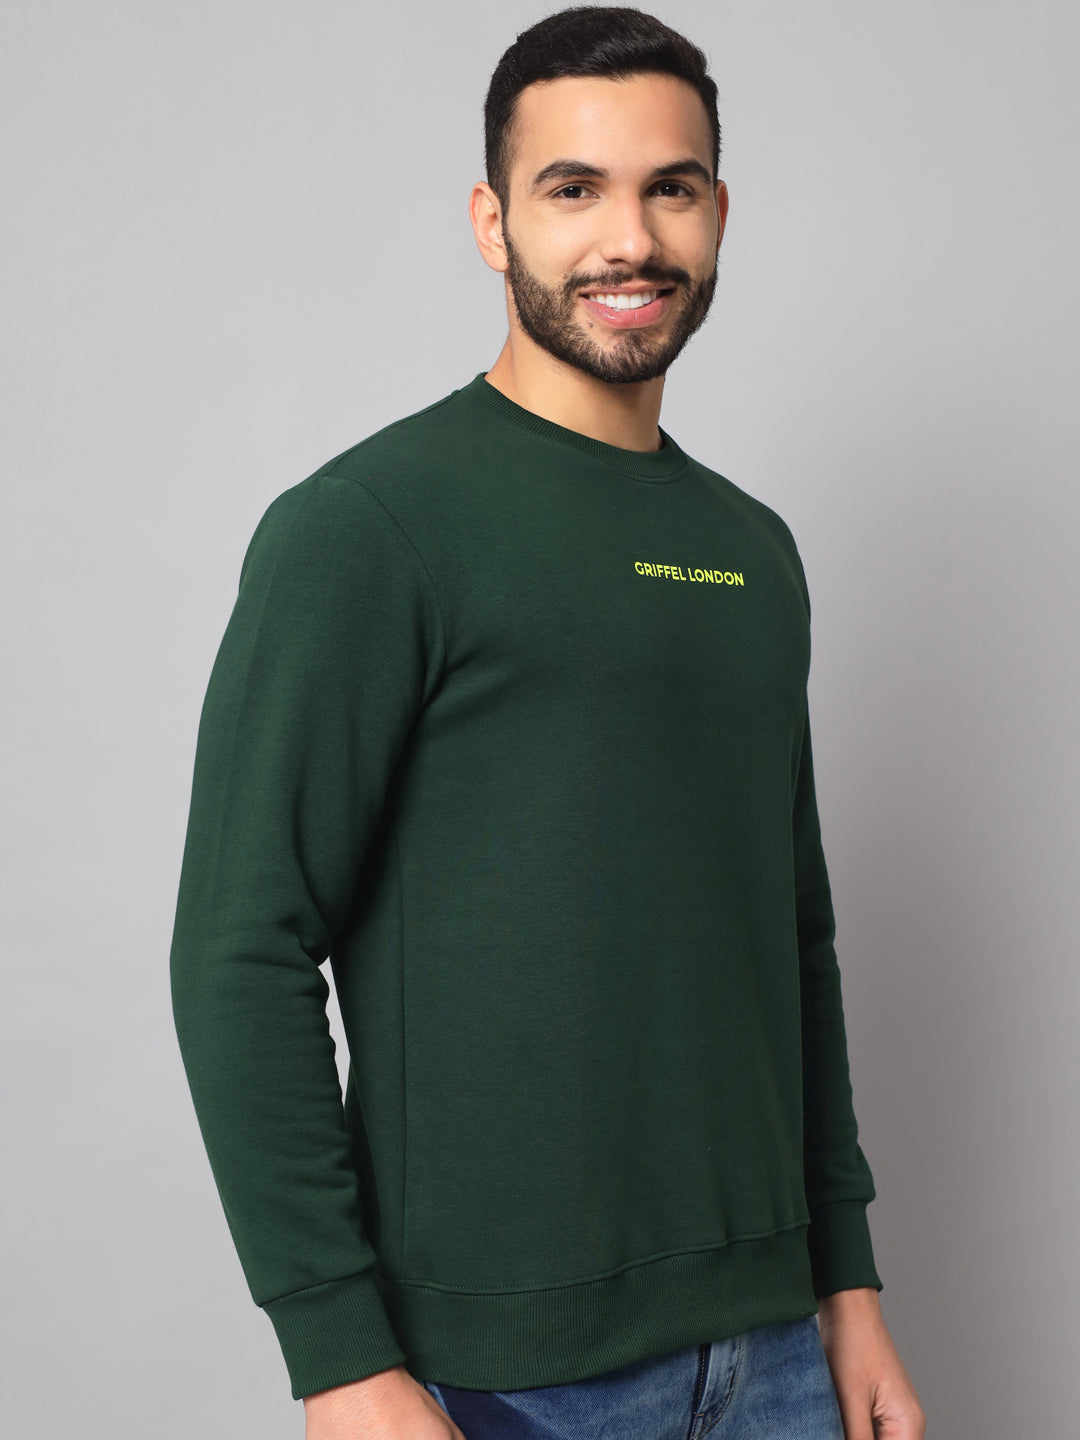 Griffel Men's Cotton Fleece Round Neck Green Sweatshirt with Full Sleeve and Front Logo Print - griffel